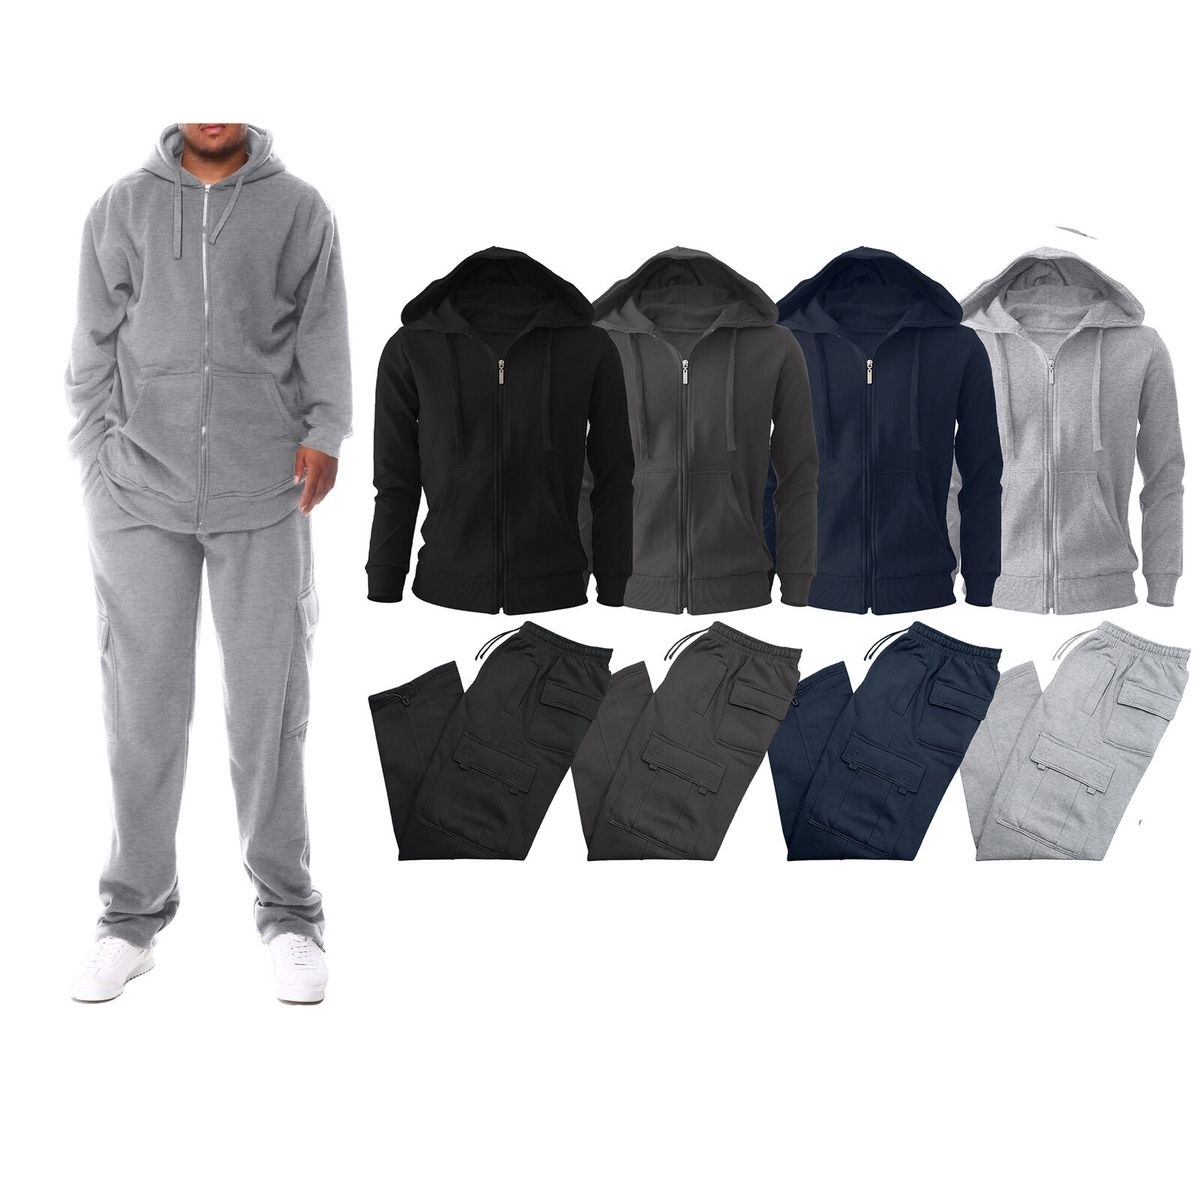 2-Pack: Men's Big & Tall Winter Warm Athletic Active Cozy Fleece Lined Multi-Pocket Full Zip Up Cargo Tracksuit - Charcoal, Xx-large